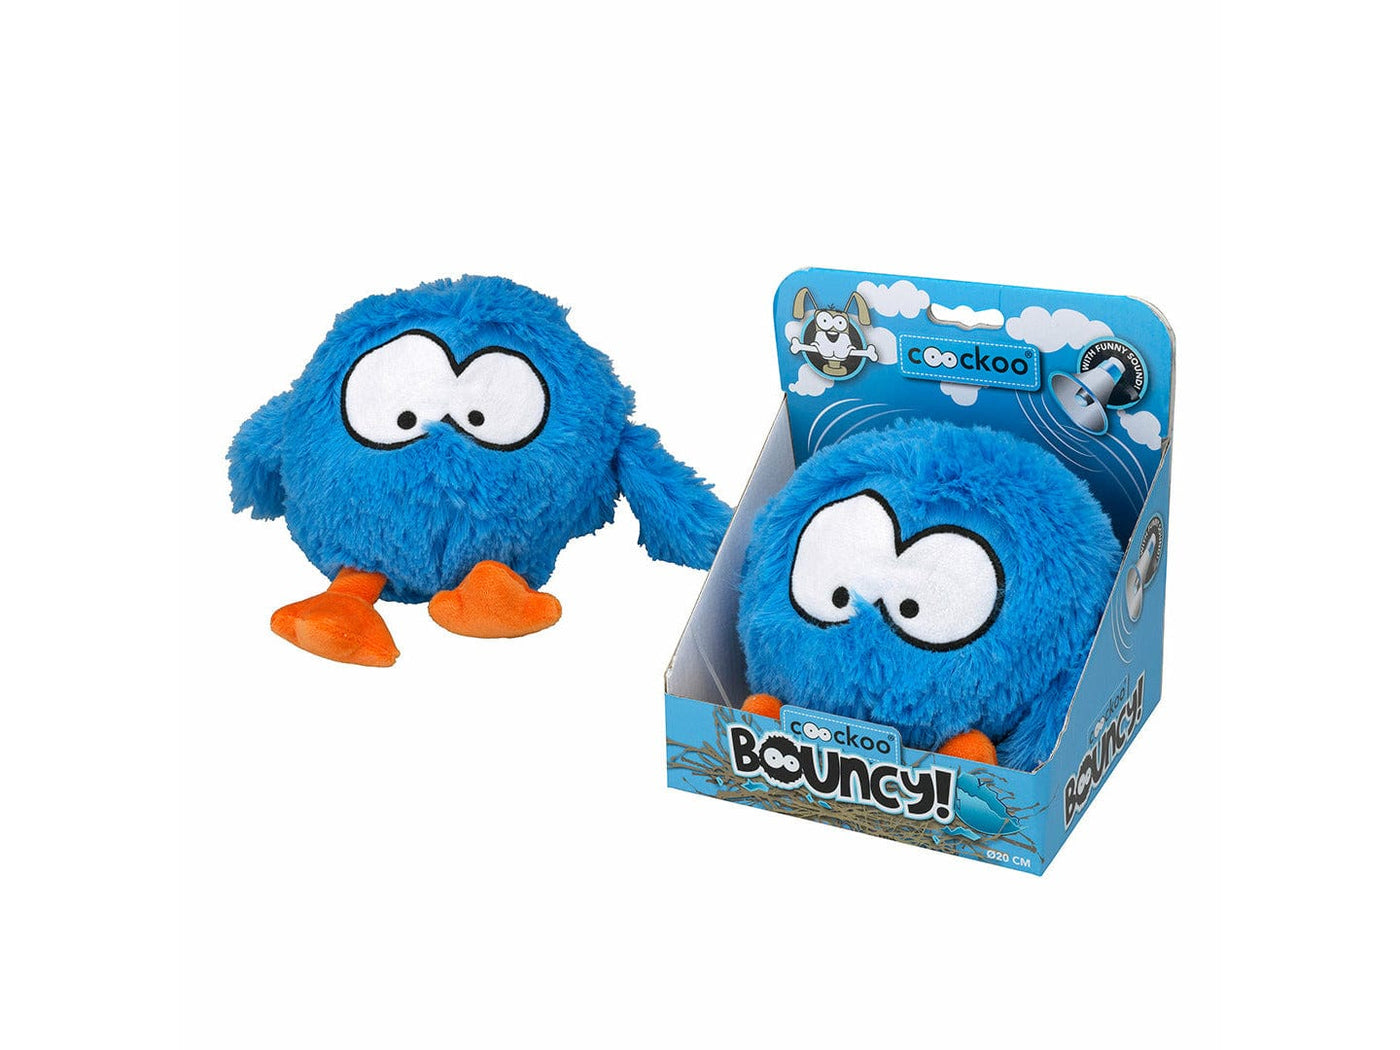 Bouncy Jumping Ball Spasmetic Laughter 28x19cm blue